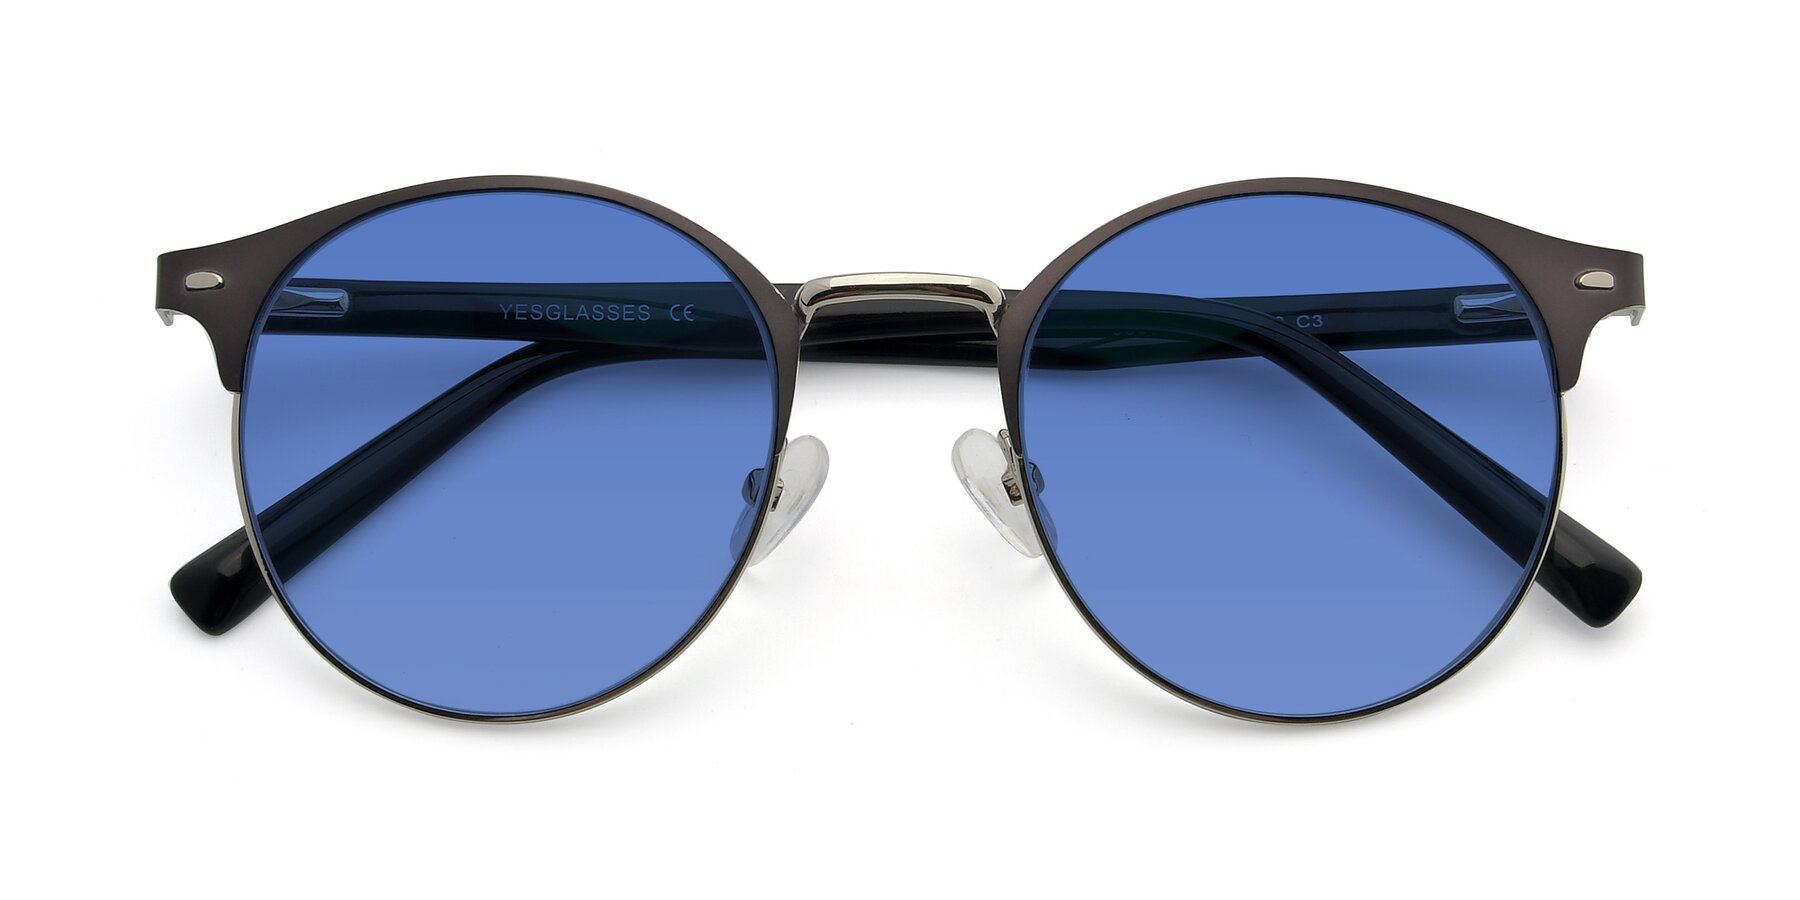 Gray-Silver Oversized Metal Round Tinted Sunglasses with Blue Sunwear  Lenses - 9099